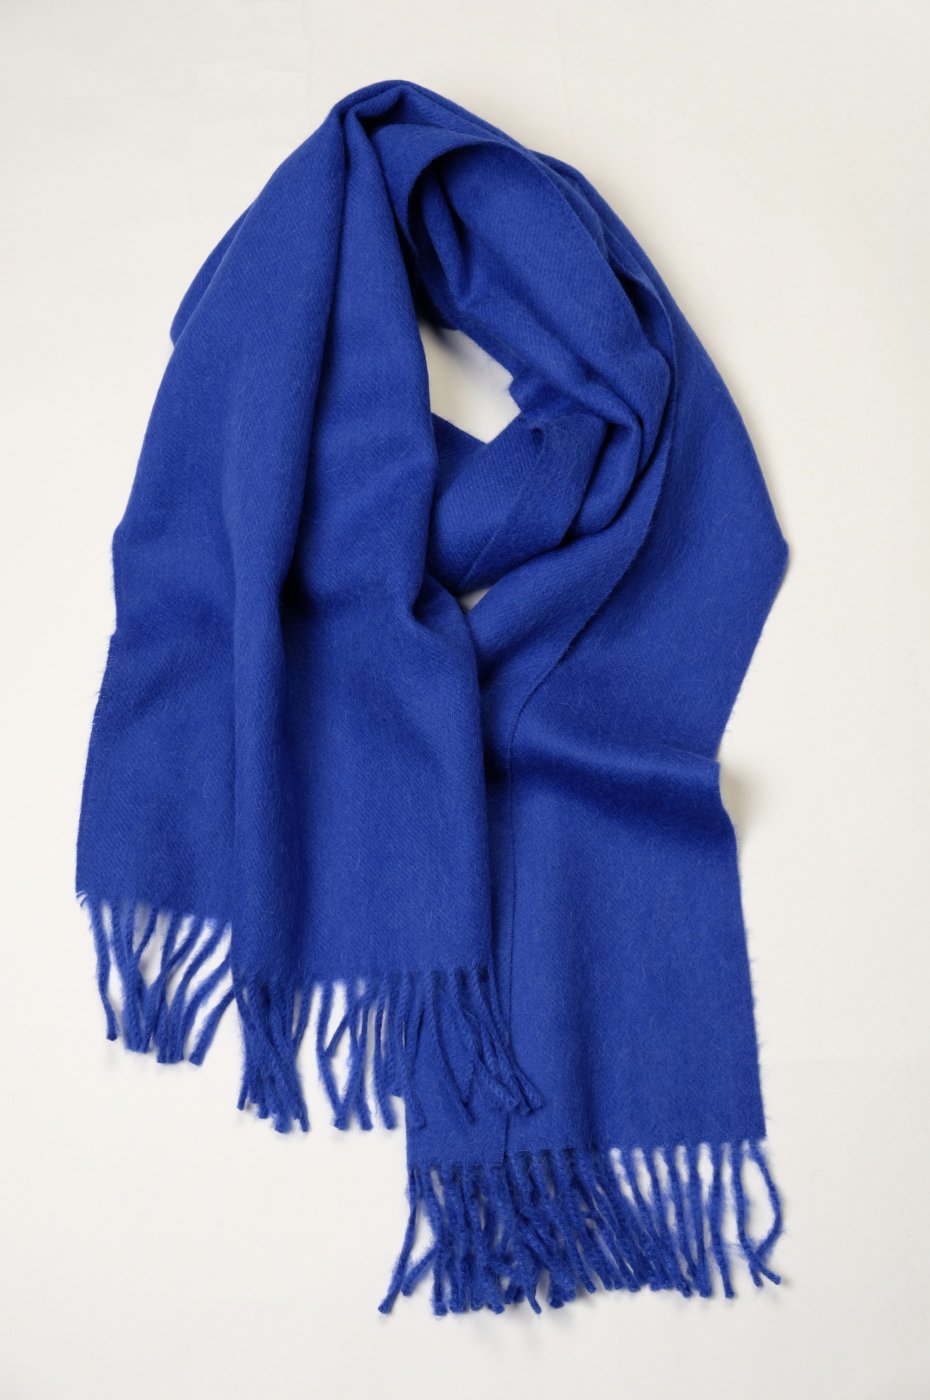 THE INOUE BROTHERS... THE INOUE BROTHERS-BRUSHED SCARF-ELECTRIC BLUE